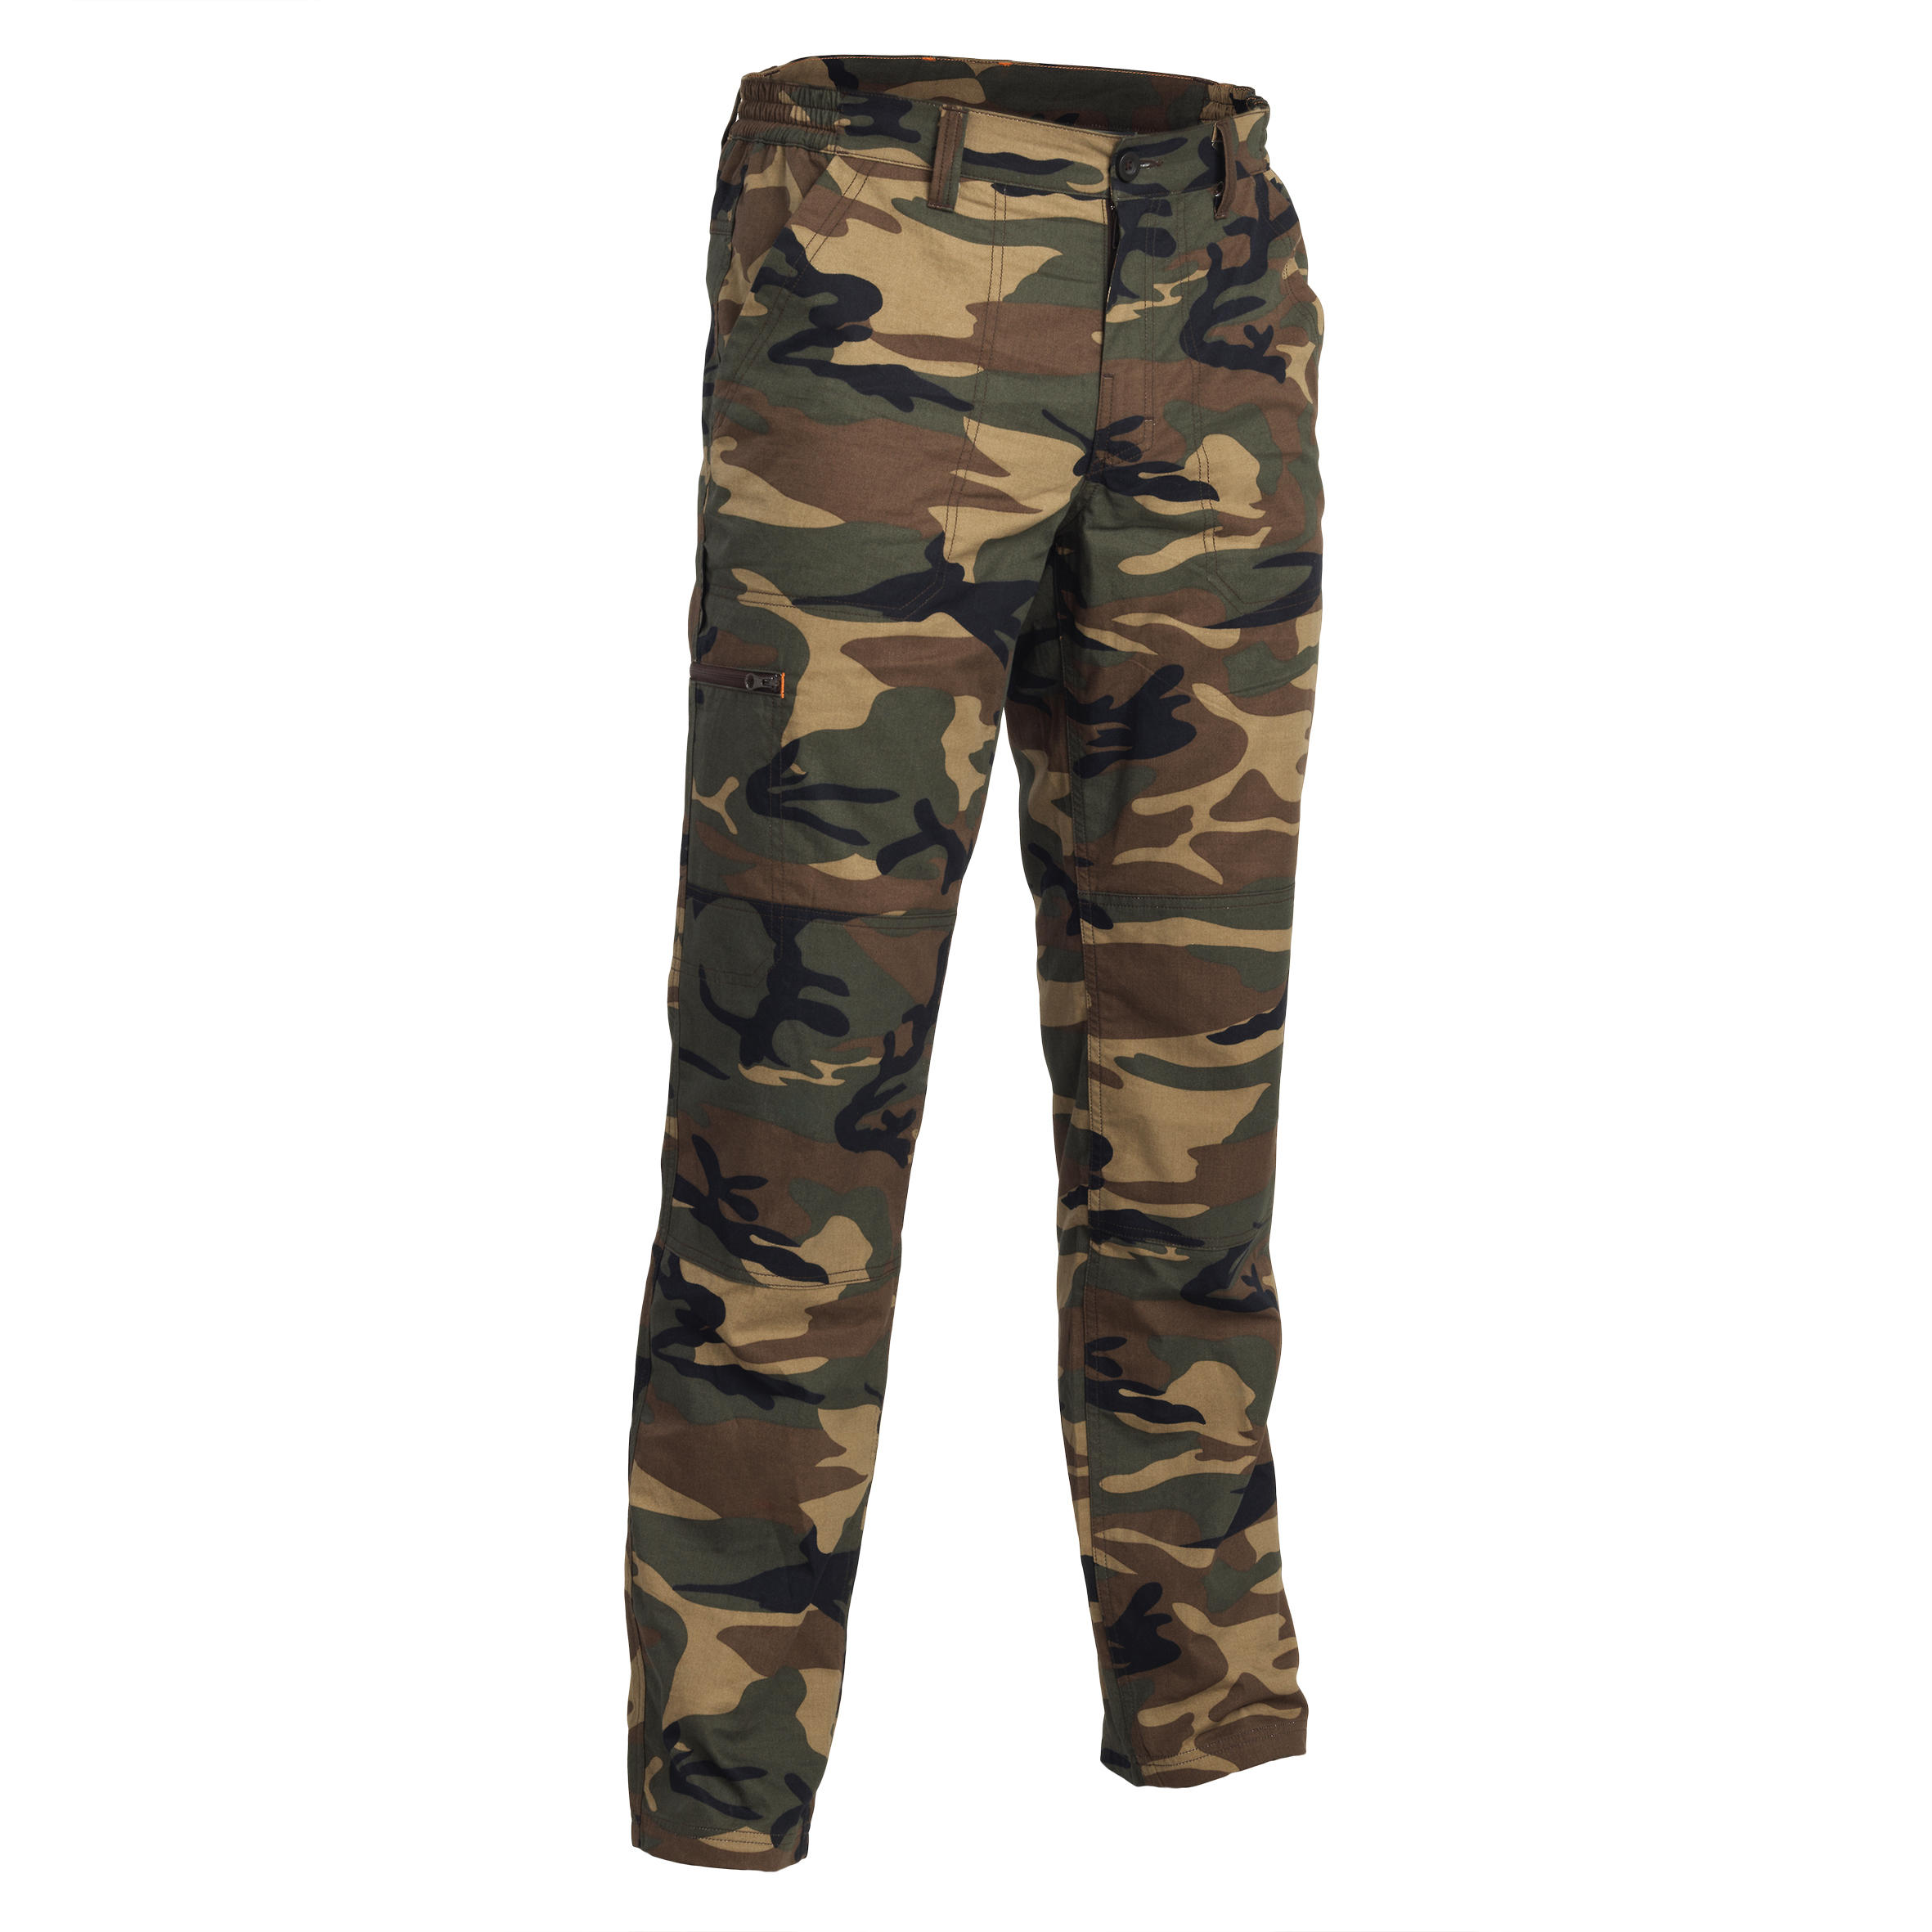 Light hunting camouflage pants 100 